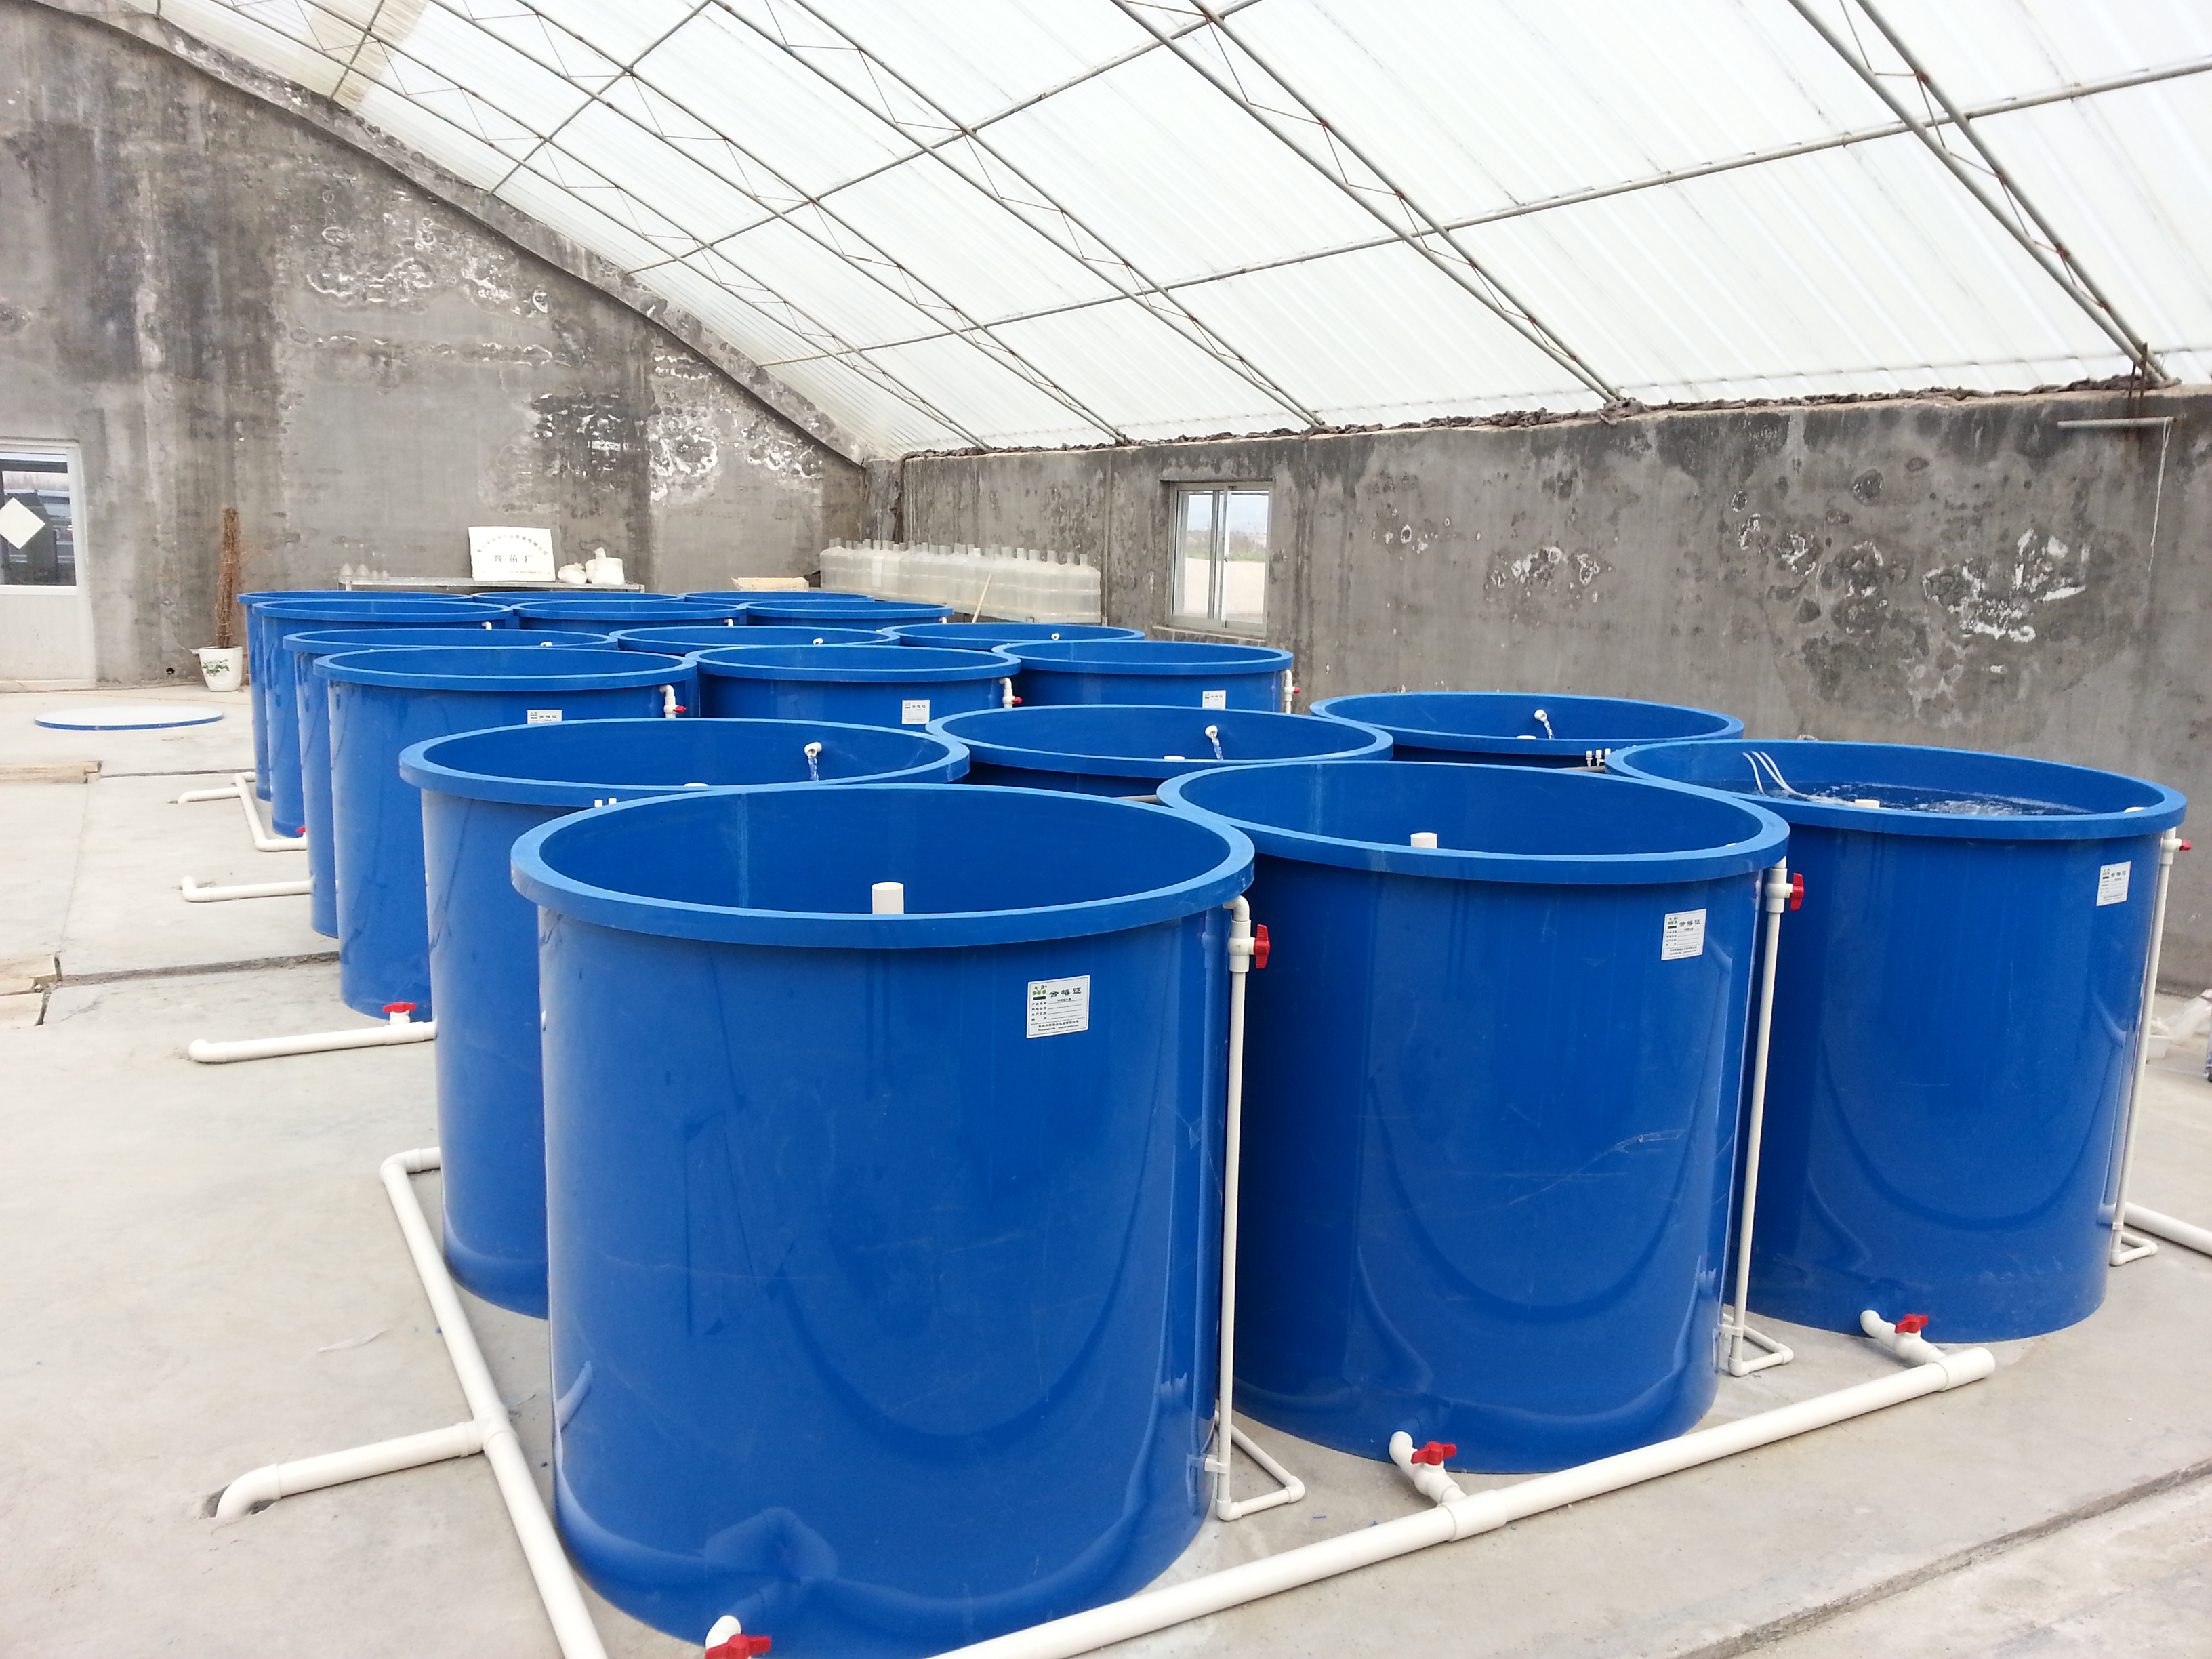 2020 new PP water tank system for fish and shrimp farming, circulating water aquaculture bucket